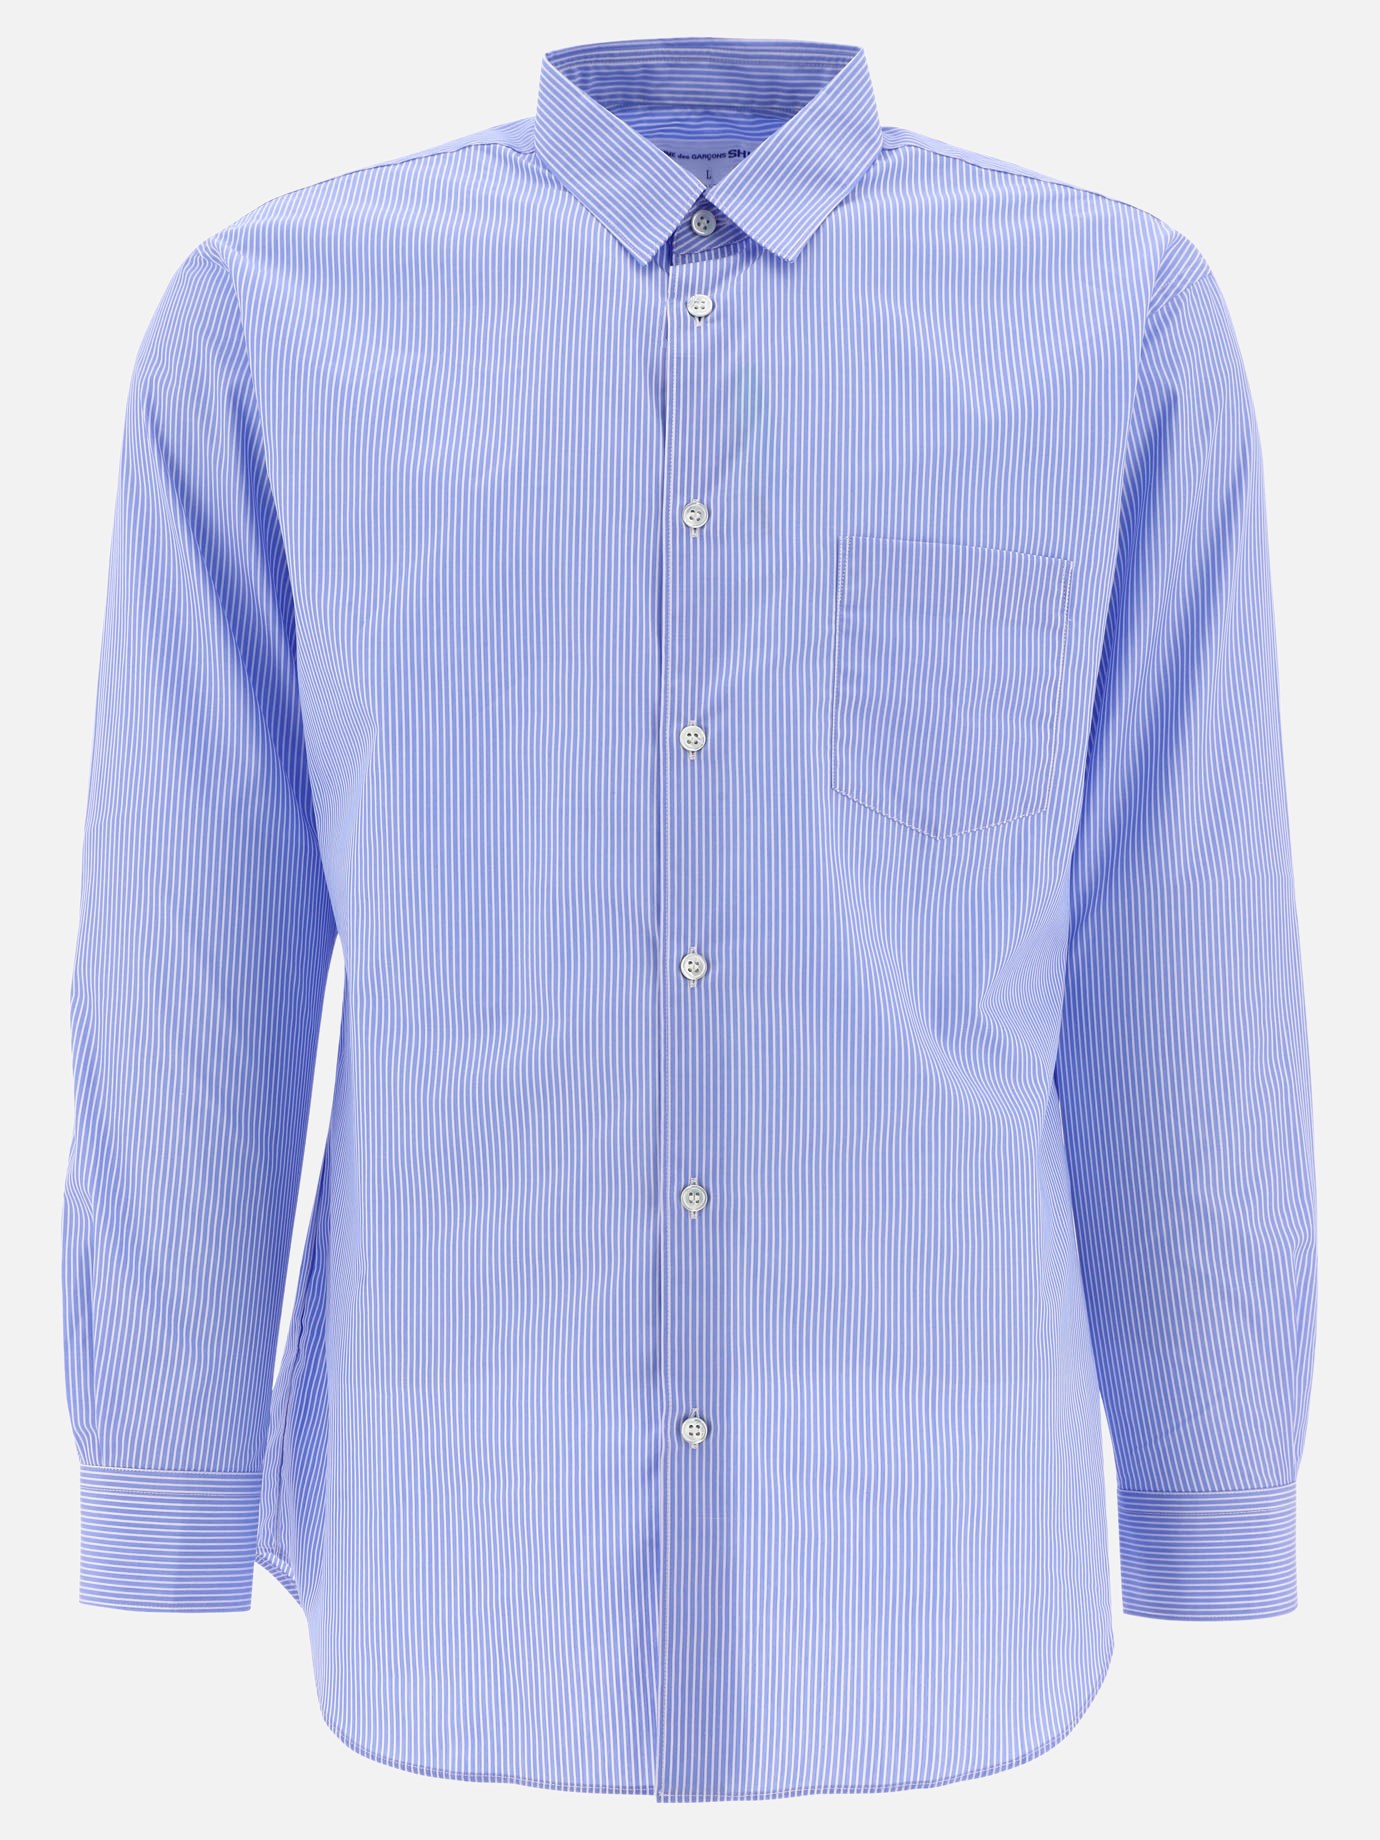 Striped shirt with breast pocket